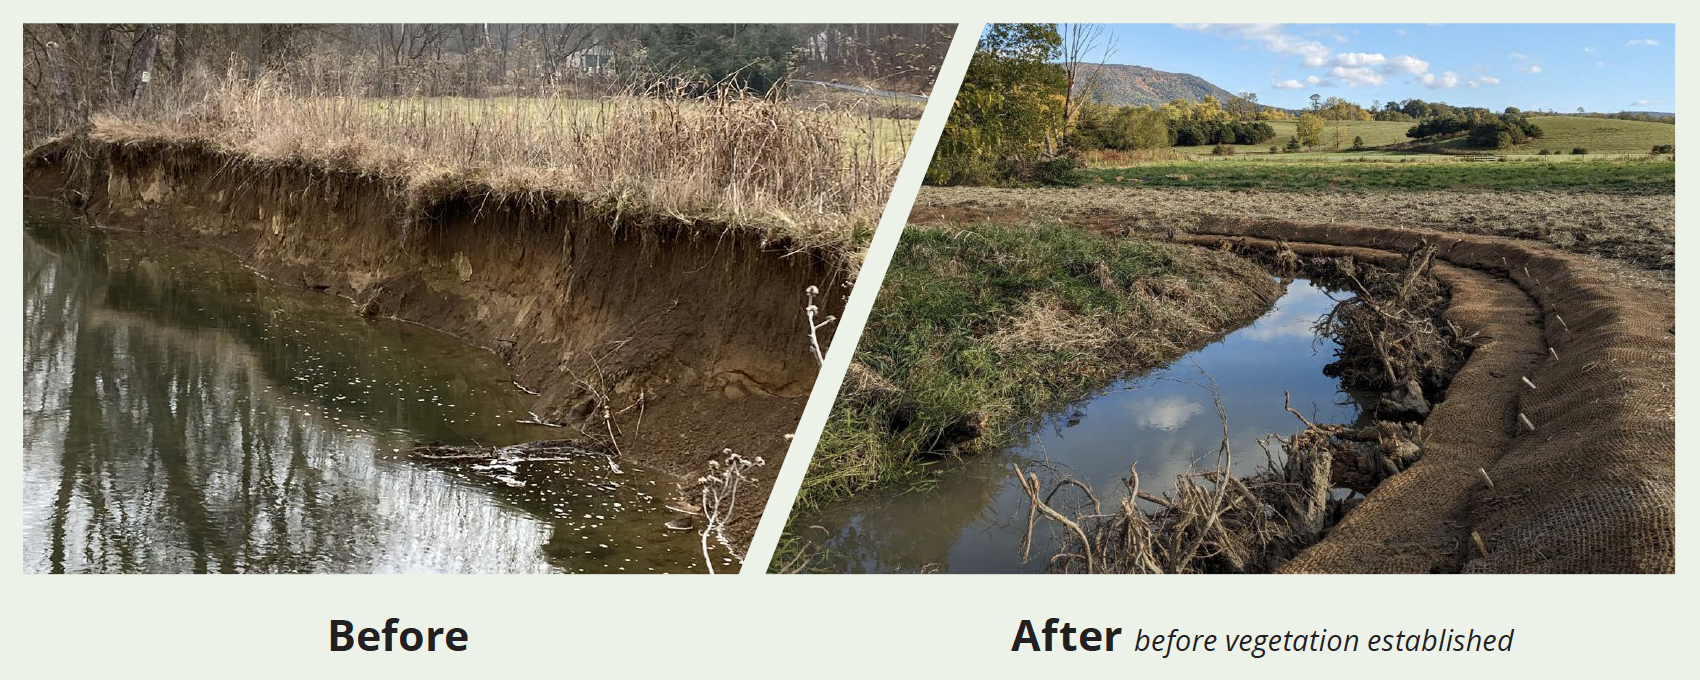 A split image graphic shows a muddy steep stream bank on the left with the word 'before' below it and the right sids shows a sloping freshly groomed and planted stream bank on the left with the words 'after, before vegetation established' below.